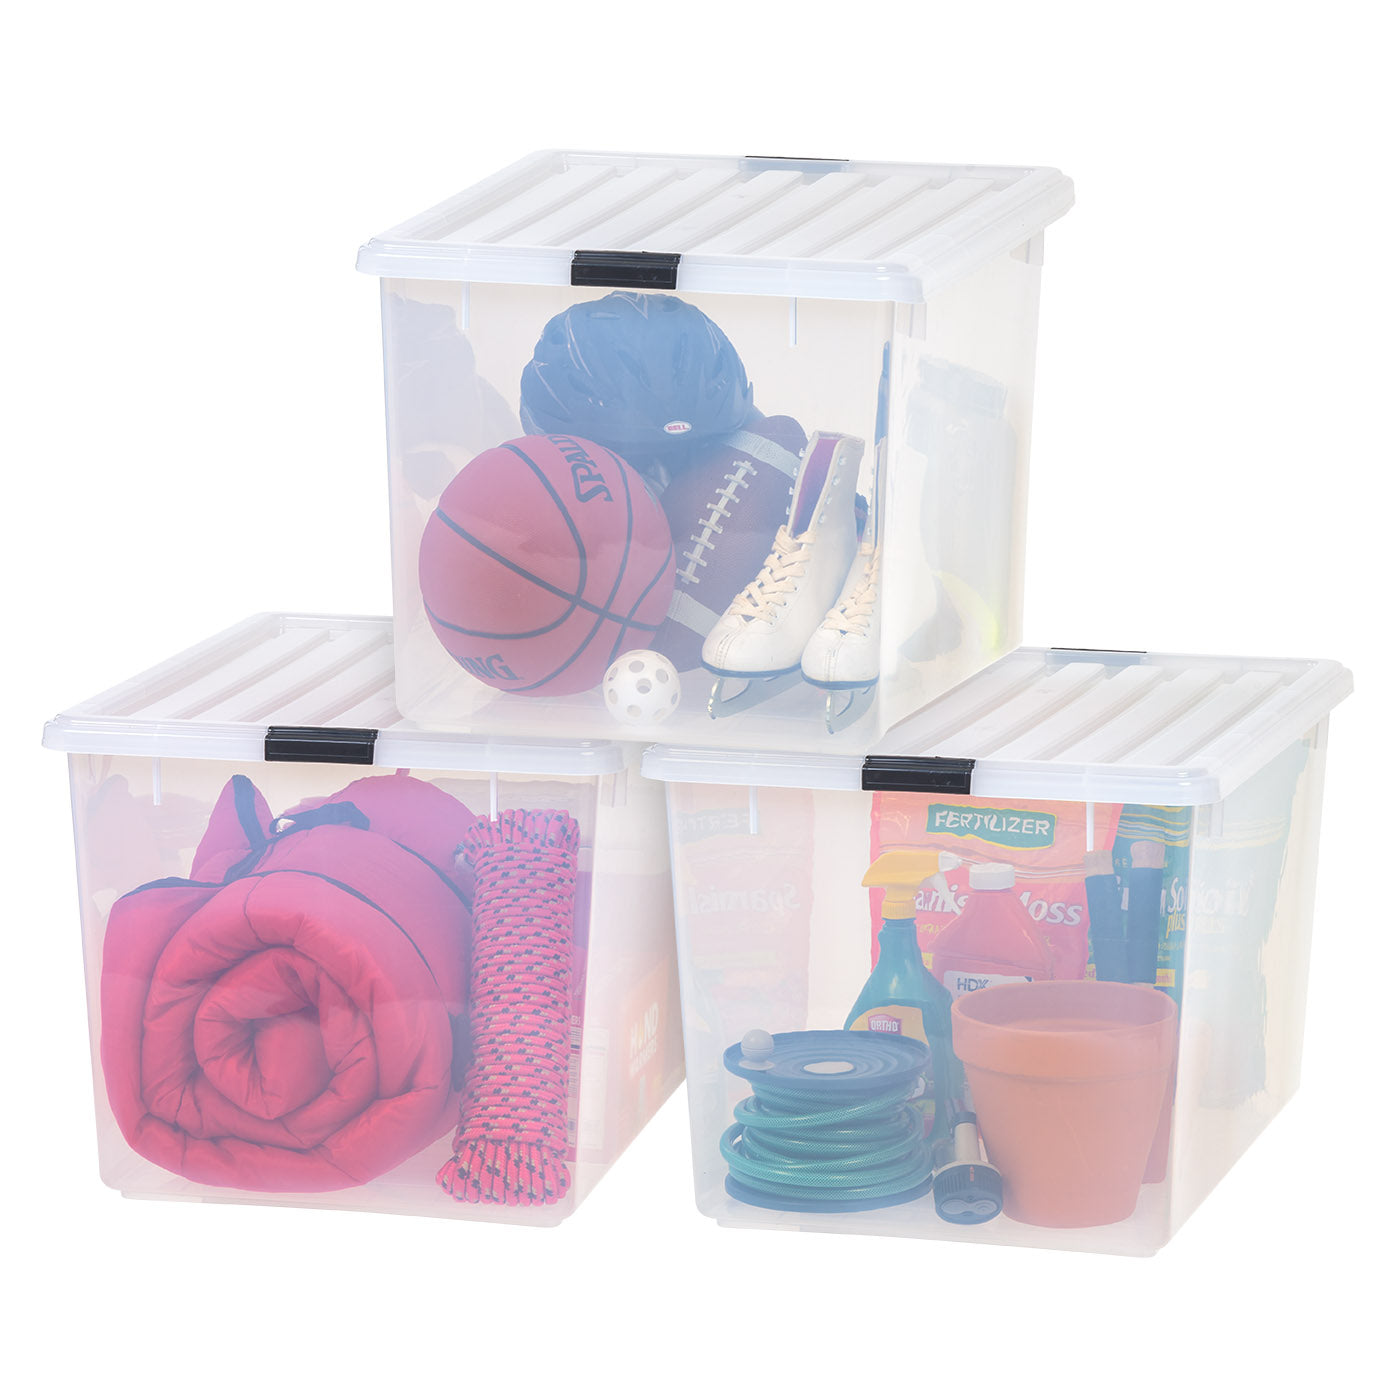 IRIS USA 3 Pack 144qt Large Clear View Plastic Storage Bin with